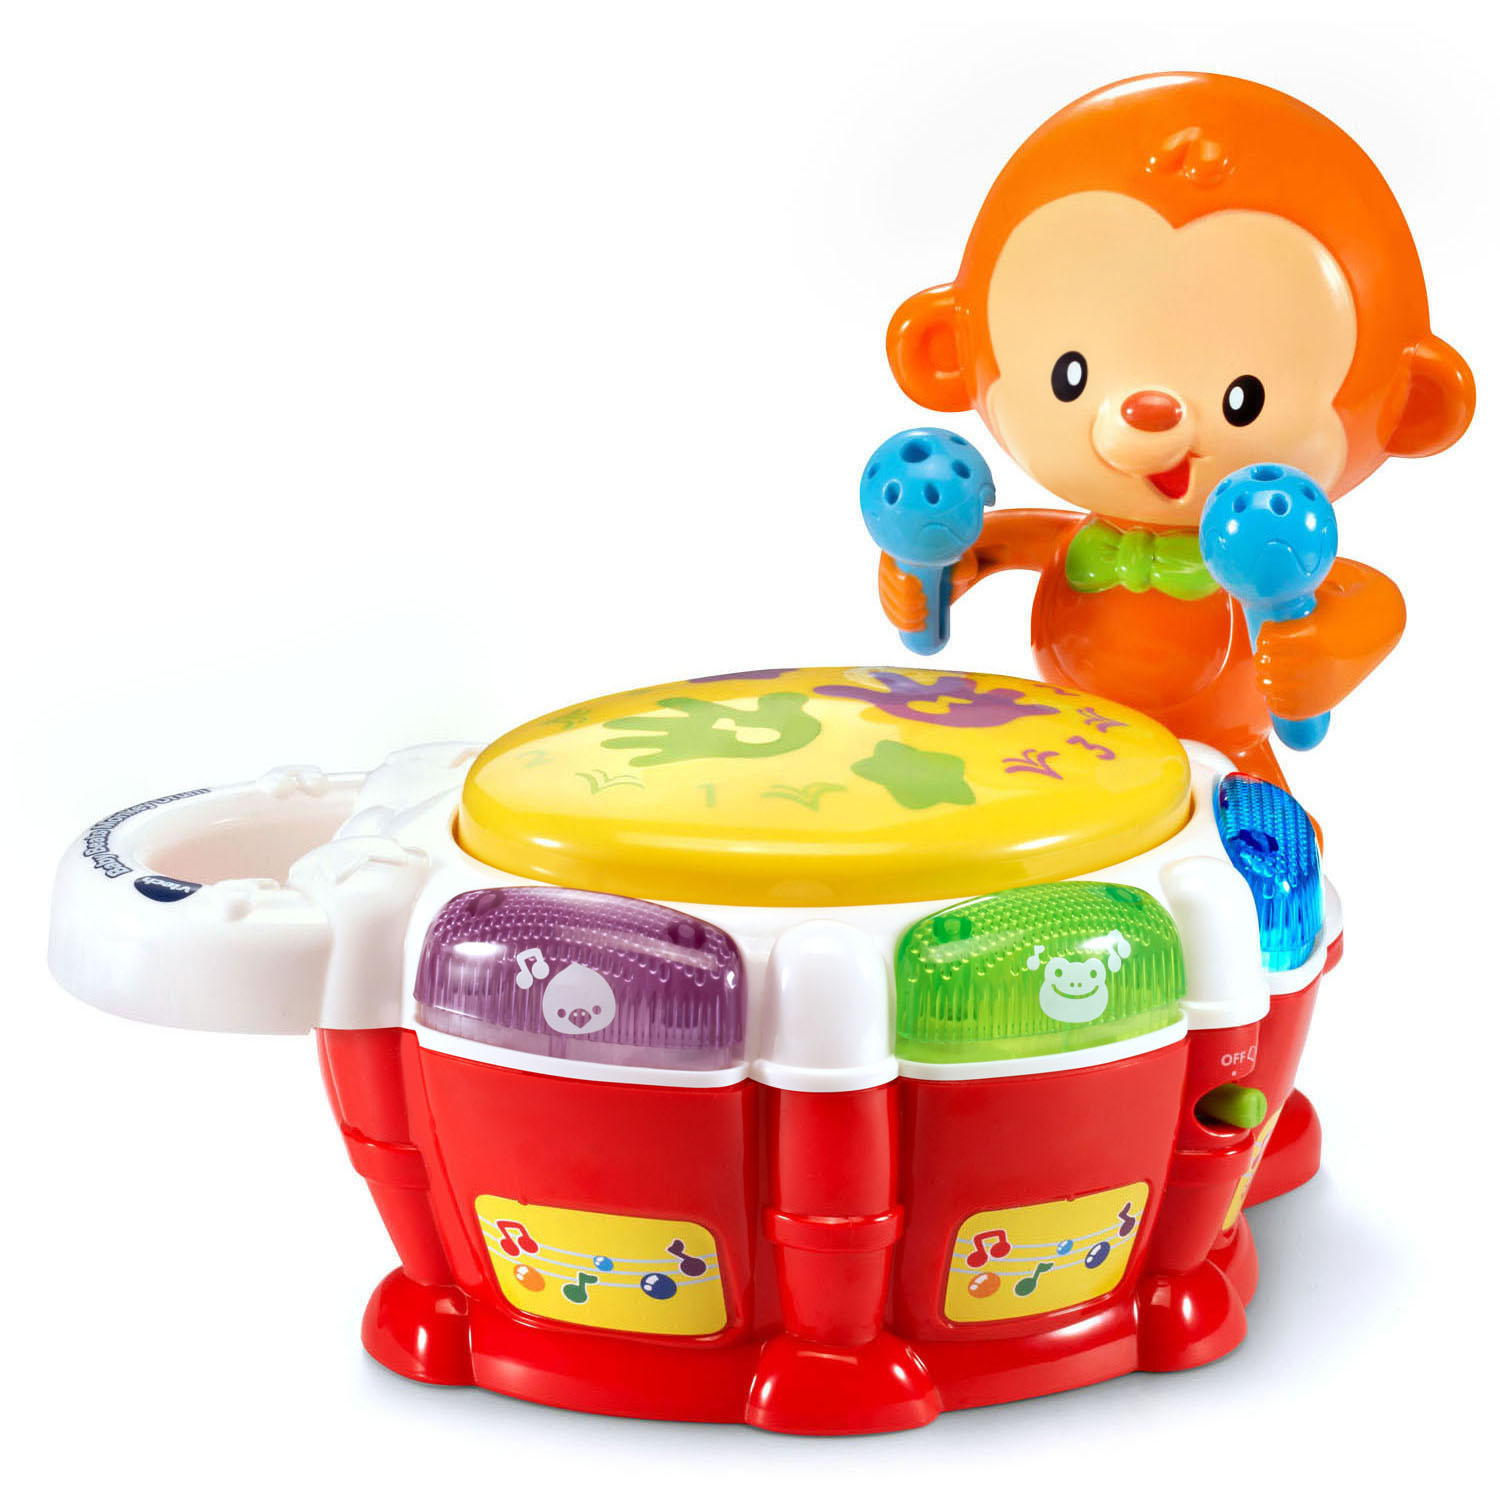 VTech Baby Beats Monkey Drum, Fun Animated Music Toy for Infant - image 4 of 9